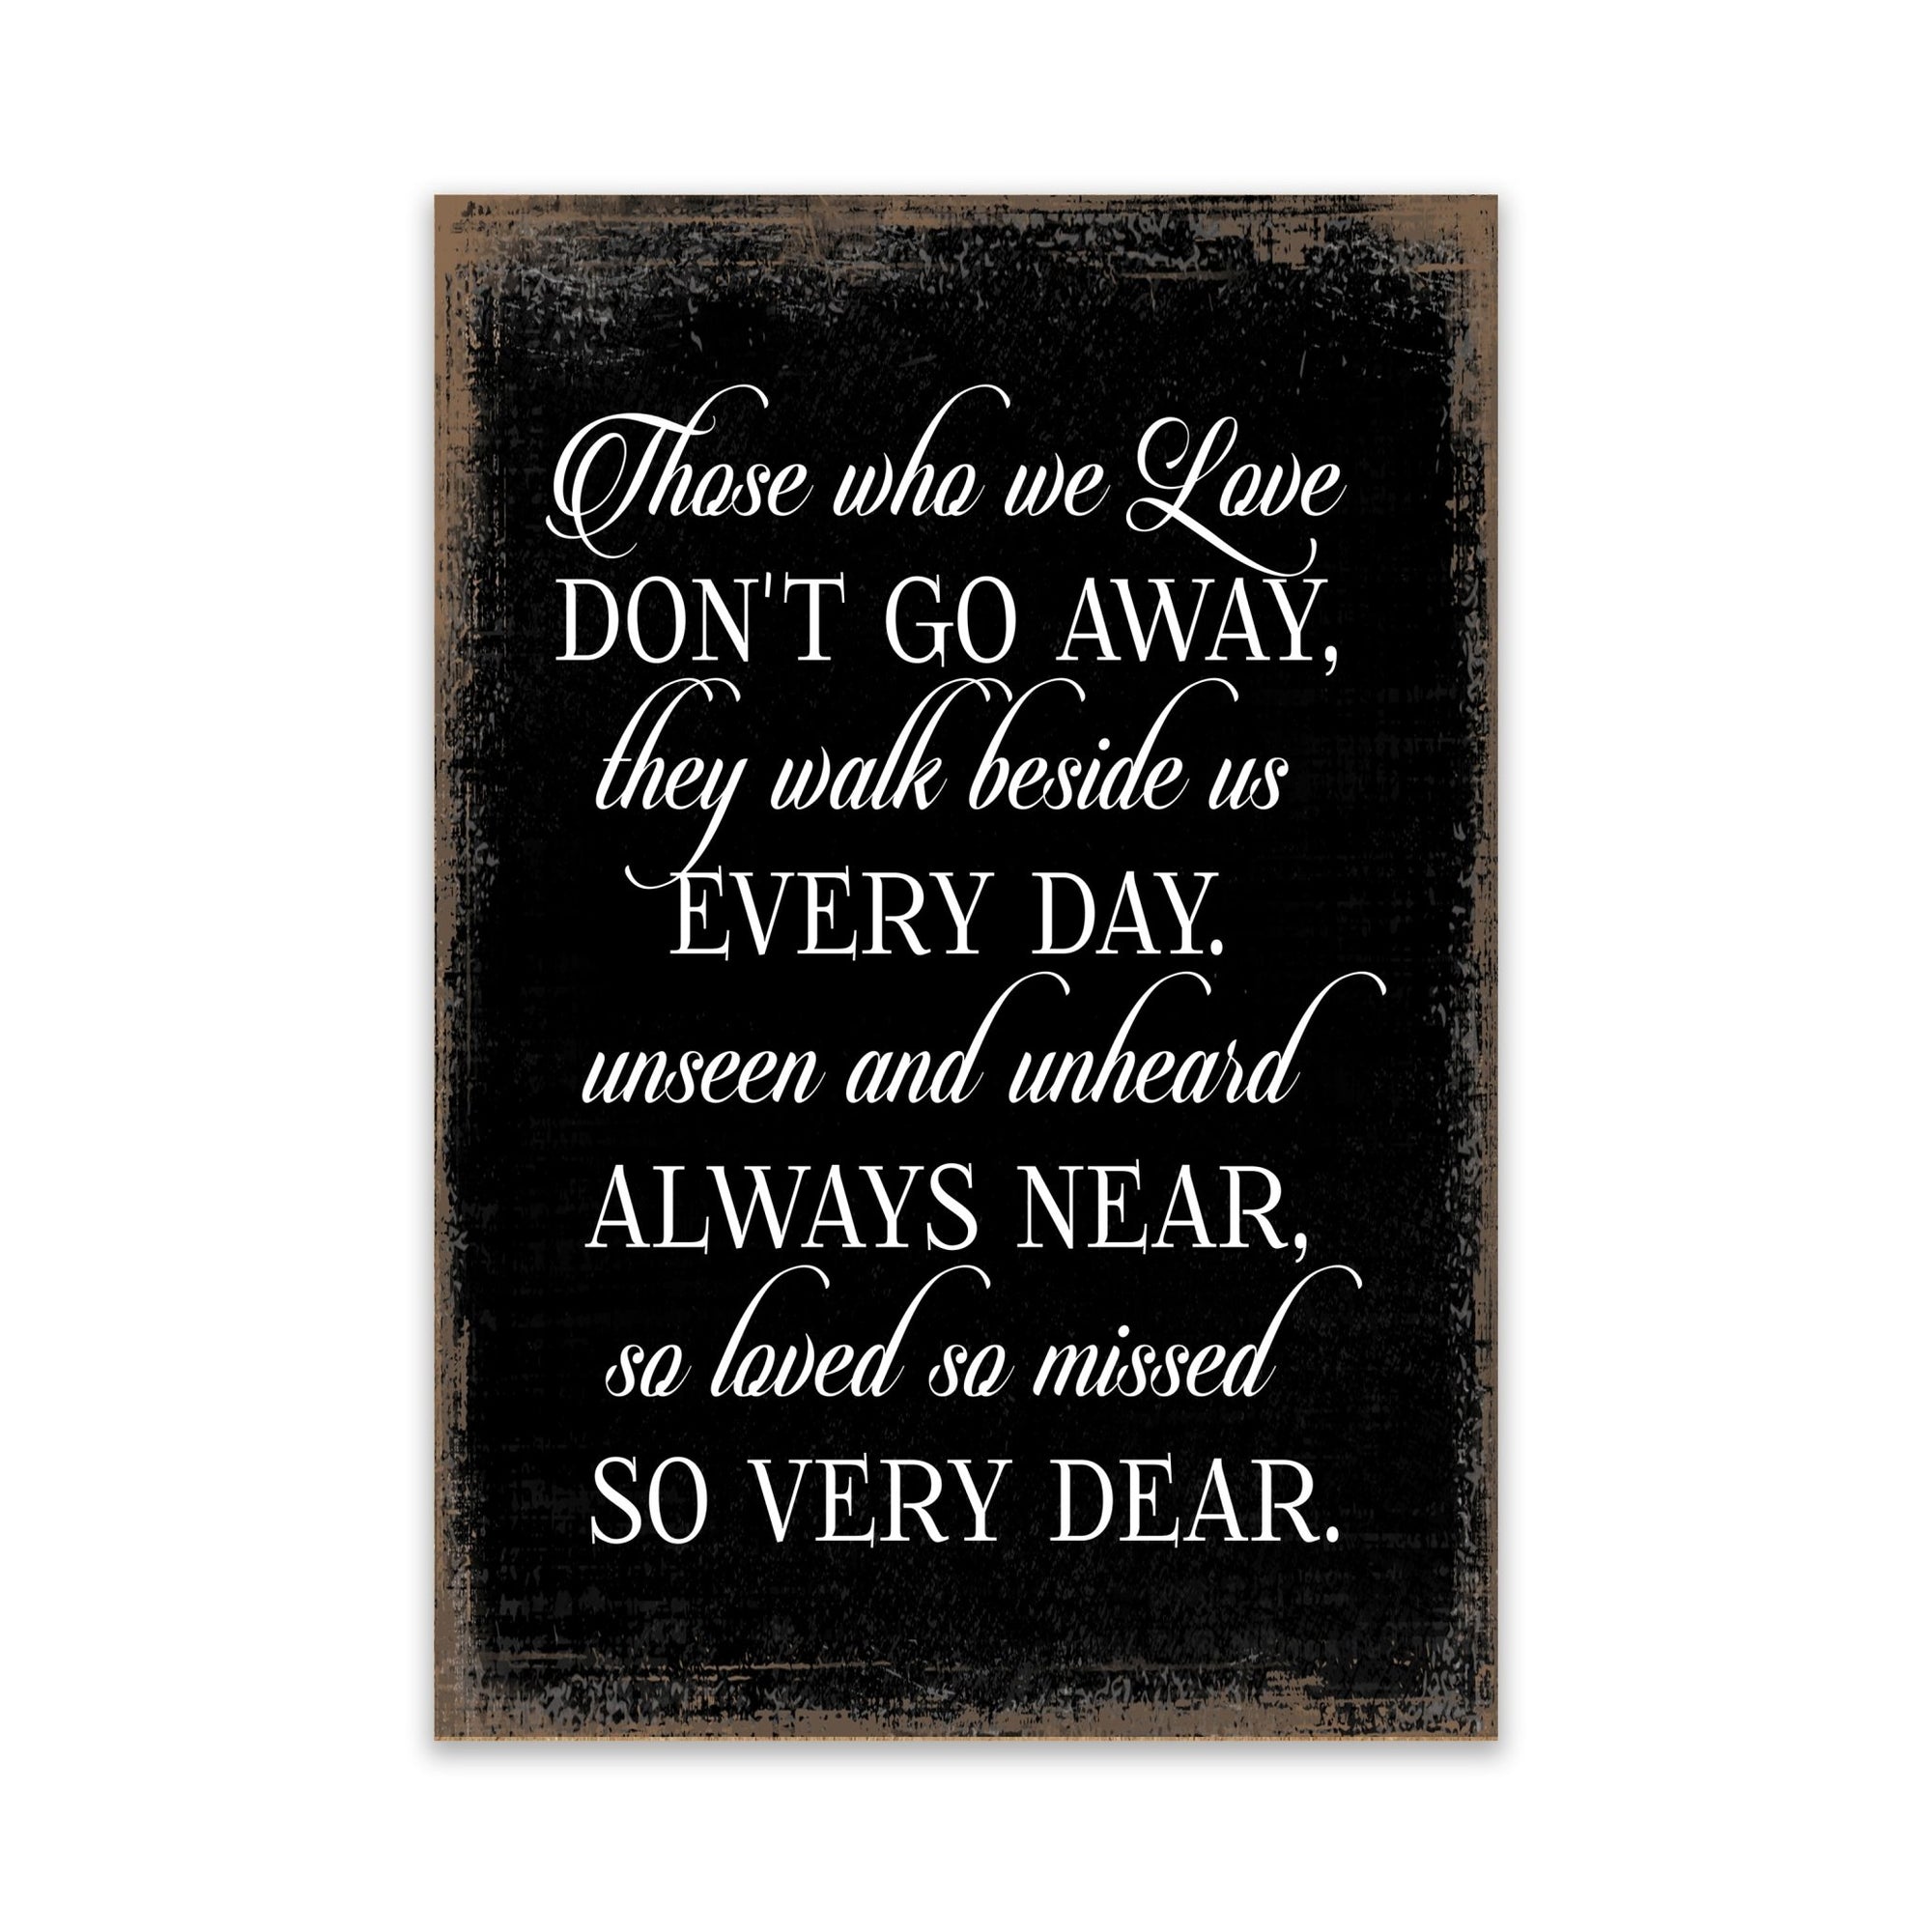 Modern Inspirational Memorial 5.5x 8 inches Wooden Sign Those We Love - Plaque Tabletop Decoration Loss of Loved One Bereavement Sympathy Keepsake - LifeSong Milestones